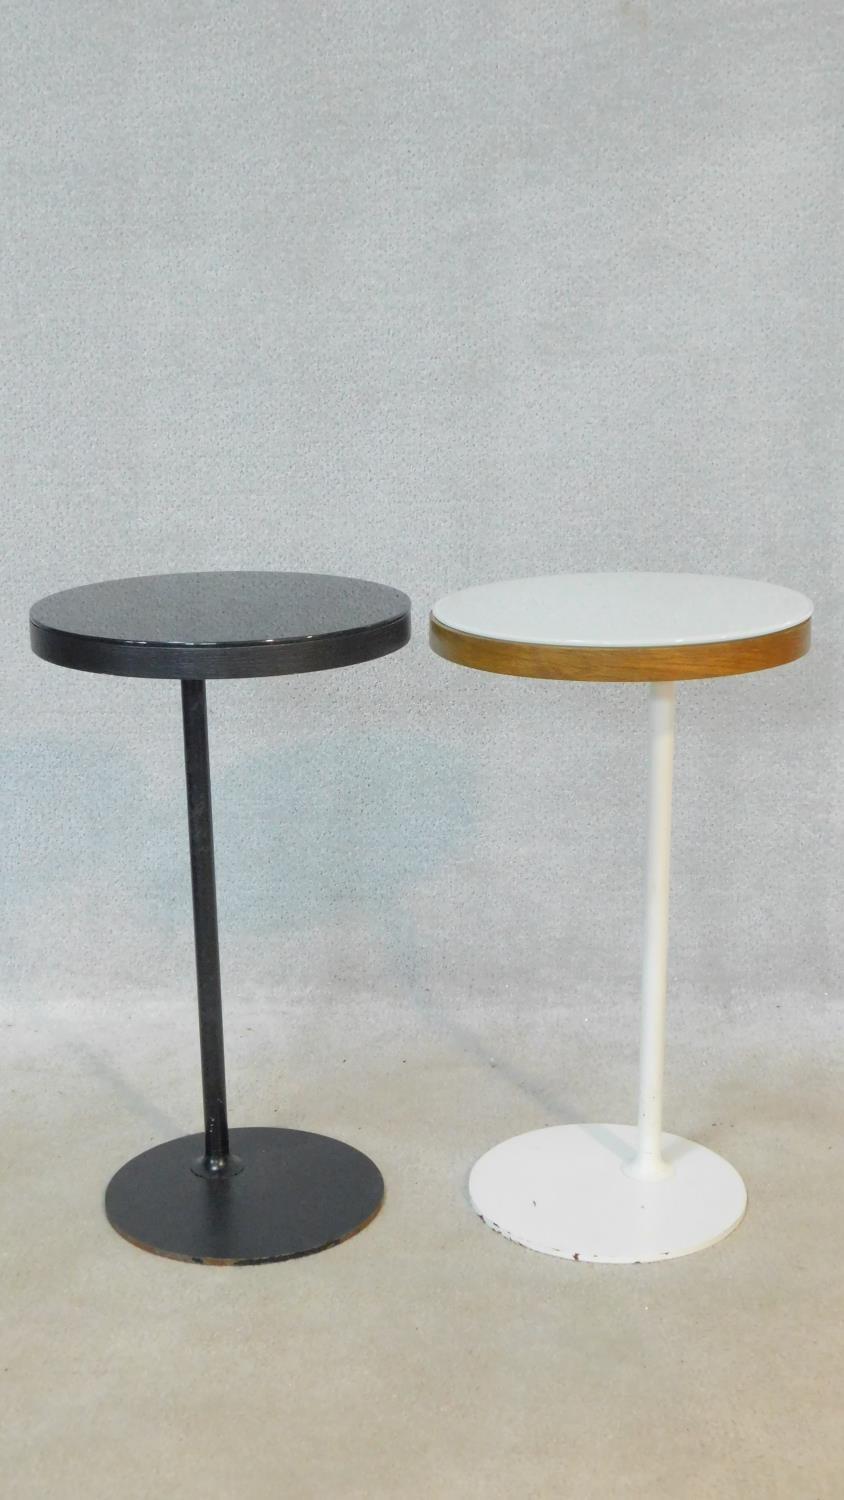 Two contemporary metal framed occasional tables with swivel action tops revealing secret